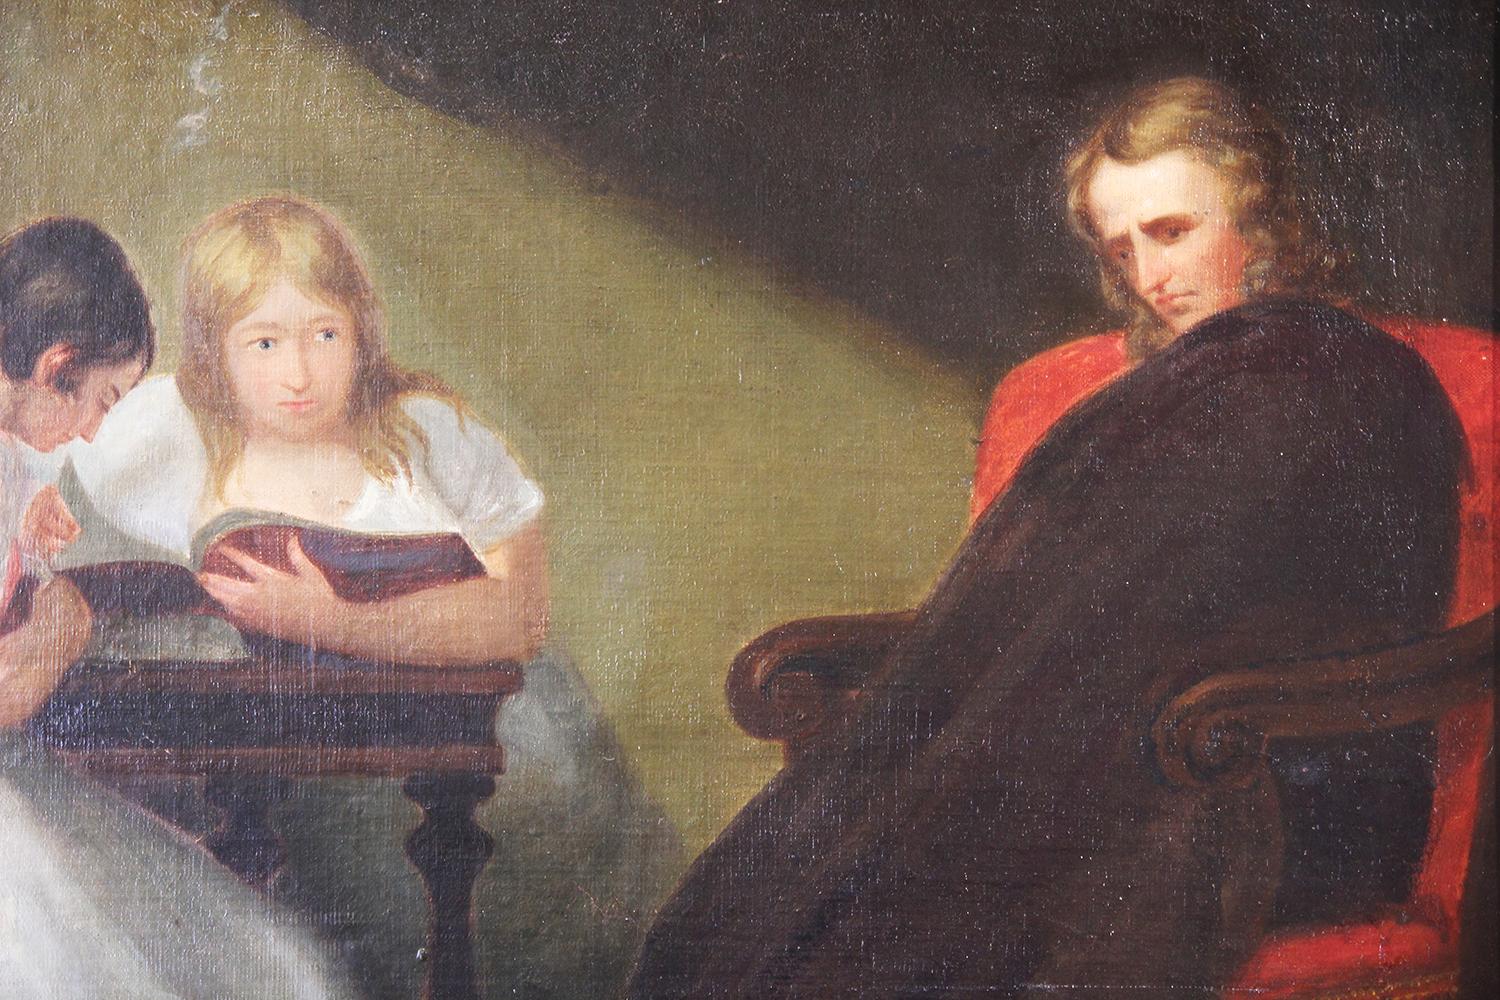 Scene of a seated headmaster watching over a pair of studying students in the style of Romanticism. The work has been attributed to the renowned American portrait artist Thomas Sully. Hung in a gold wooden frame with decorative carvings.